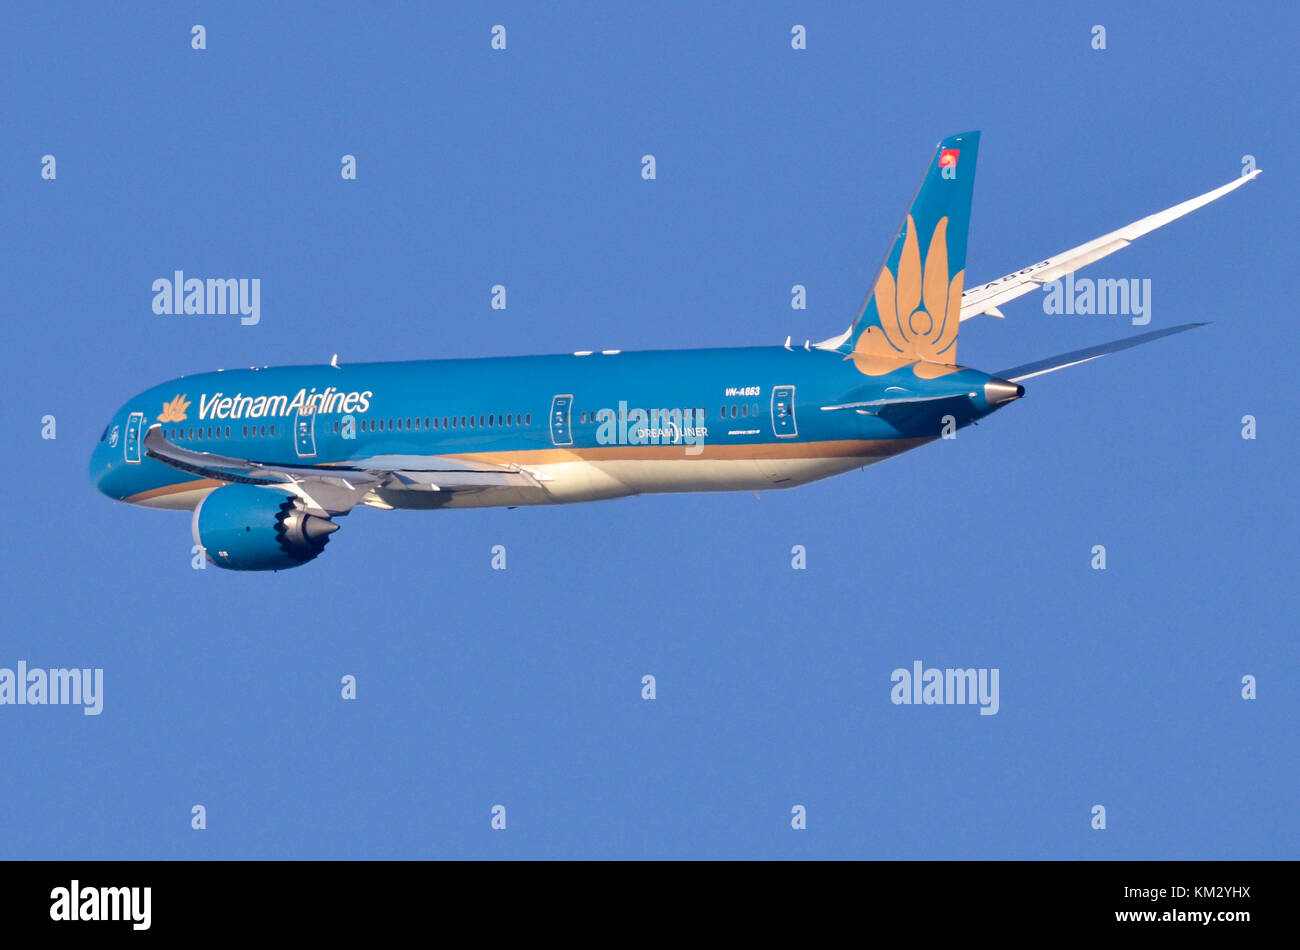 Boeing 787-9 Dreamliner, Vietnam Airlines, Heathrow Airport, UK. Boeing 787-9 VN-A863 is seen departing after take-off. Stock Photo